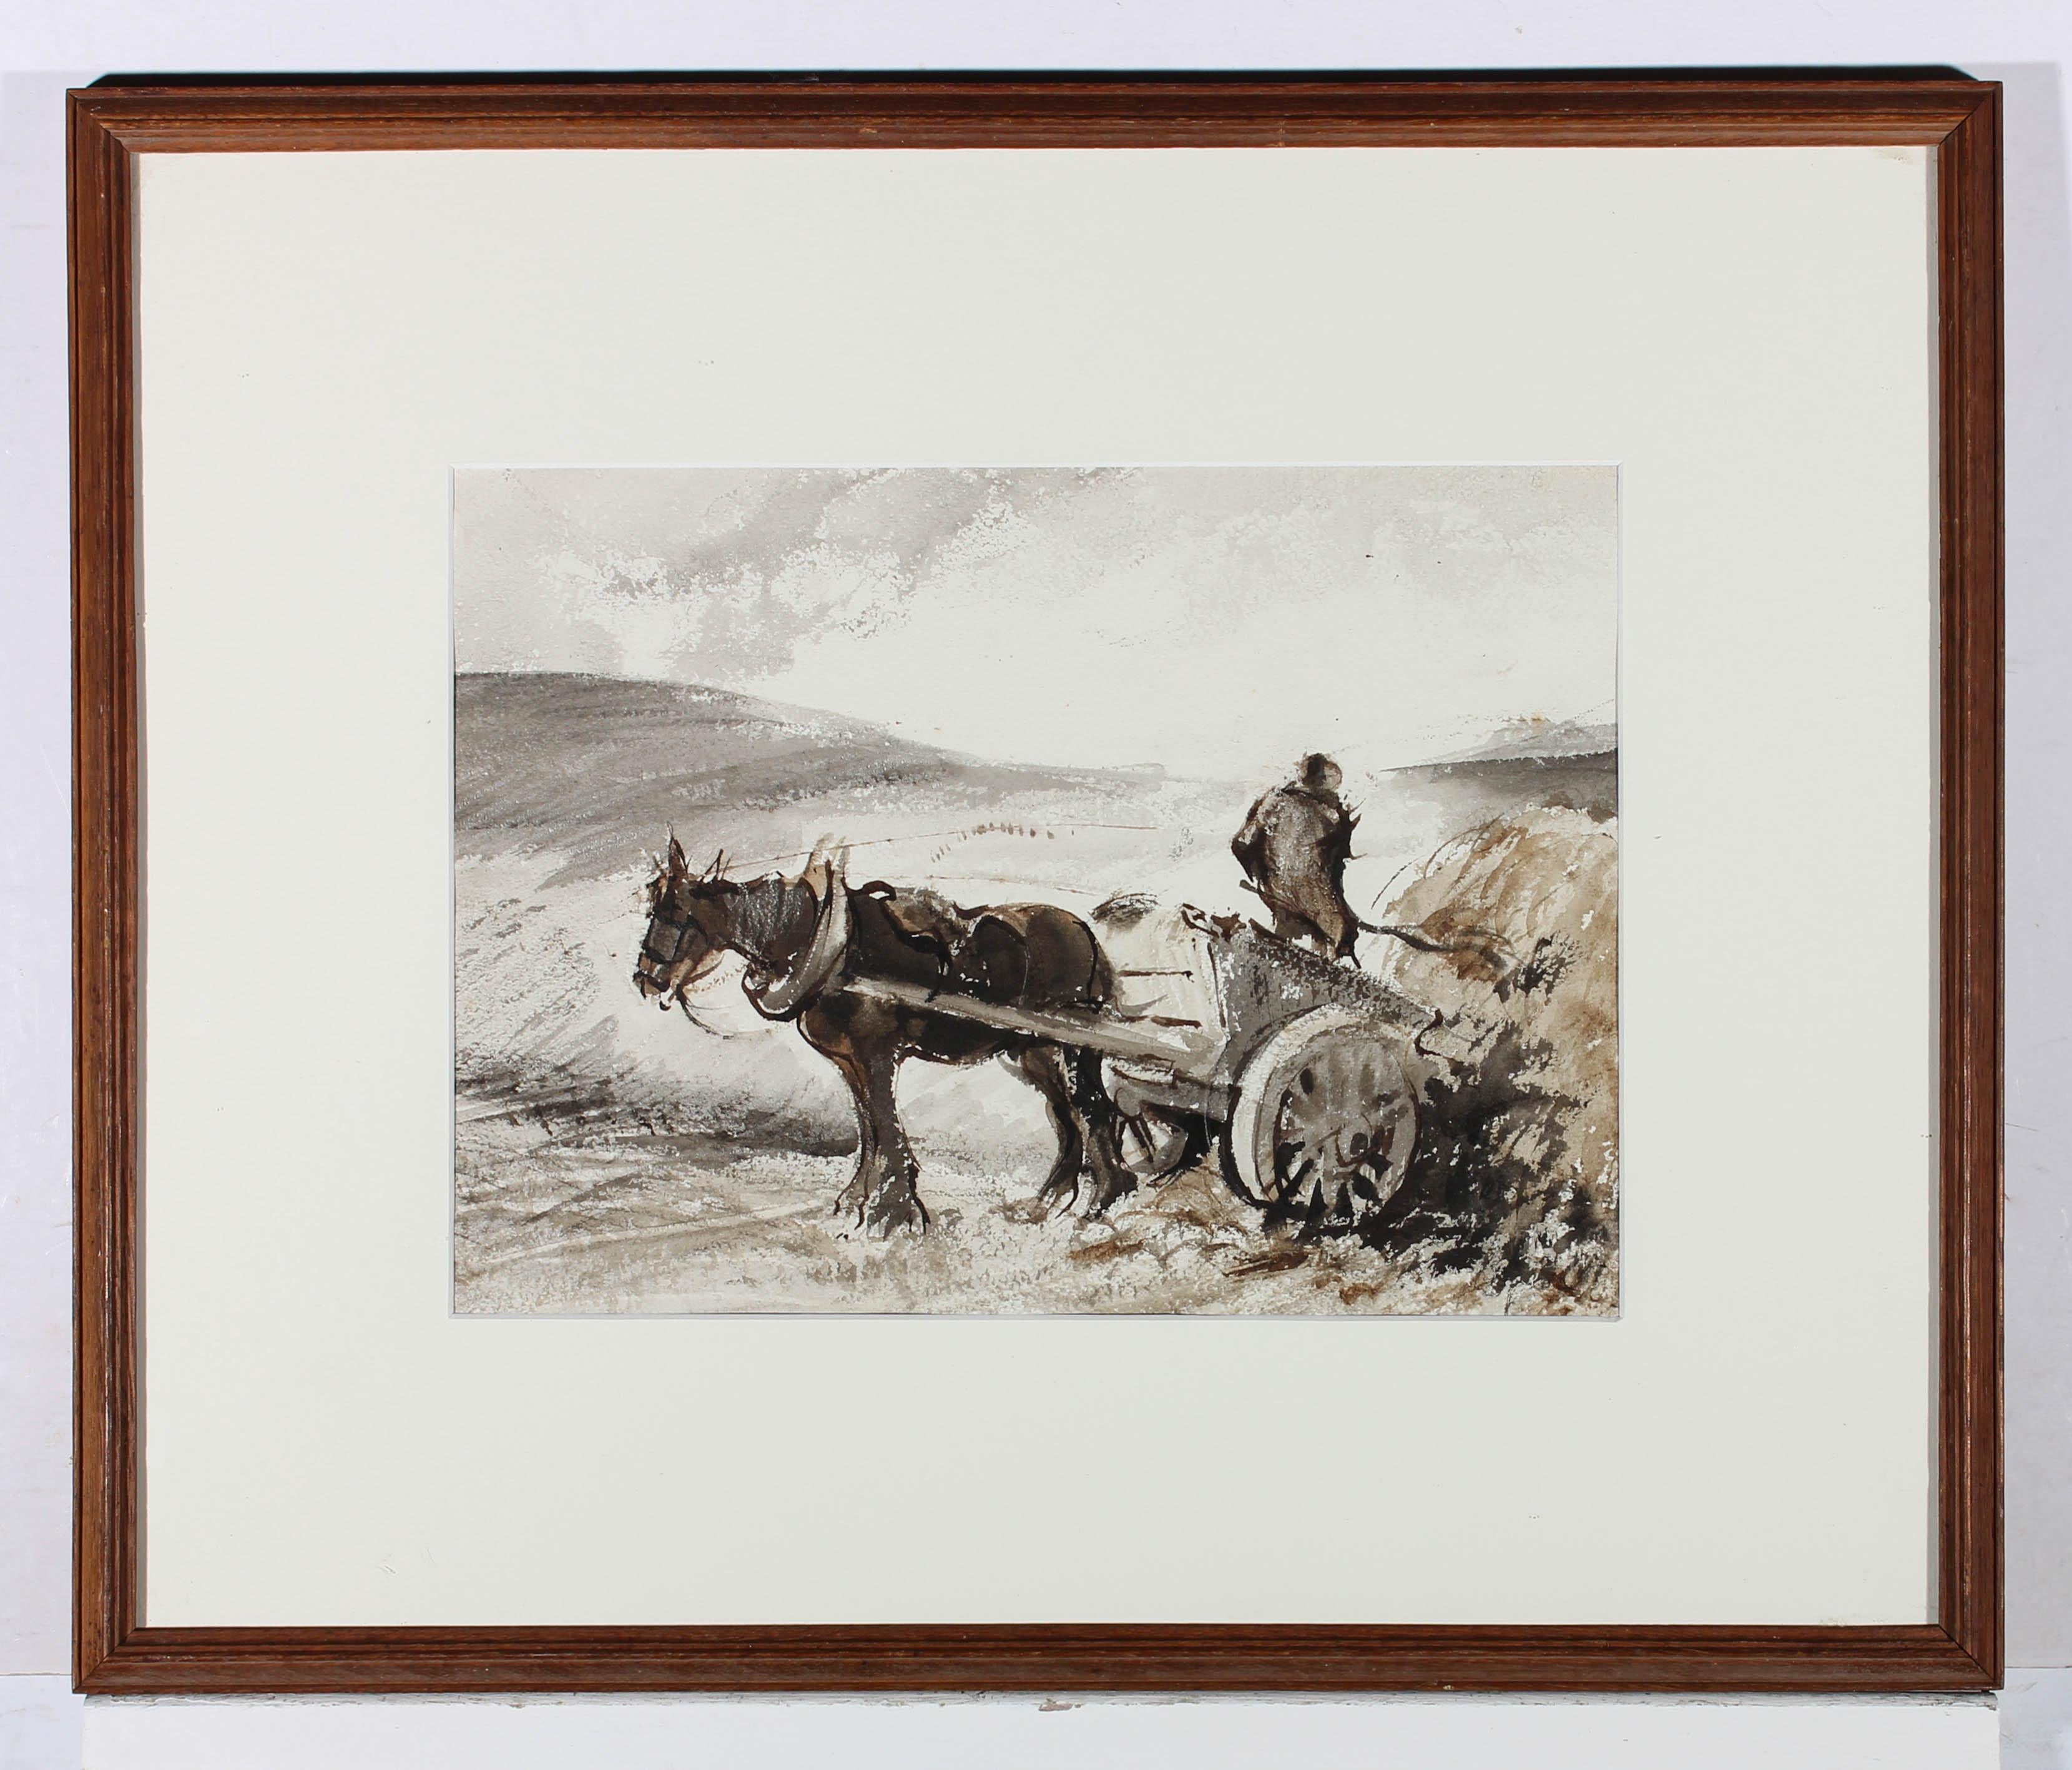 A gestural countryside scene in muted colours, depicting a farmer standing on the back of a horse drawn cart, gathering in a pile of straw before the rain. The painting is attractively presented in a contemporary slim wooden frame and white card